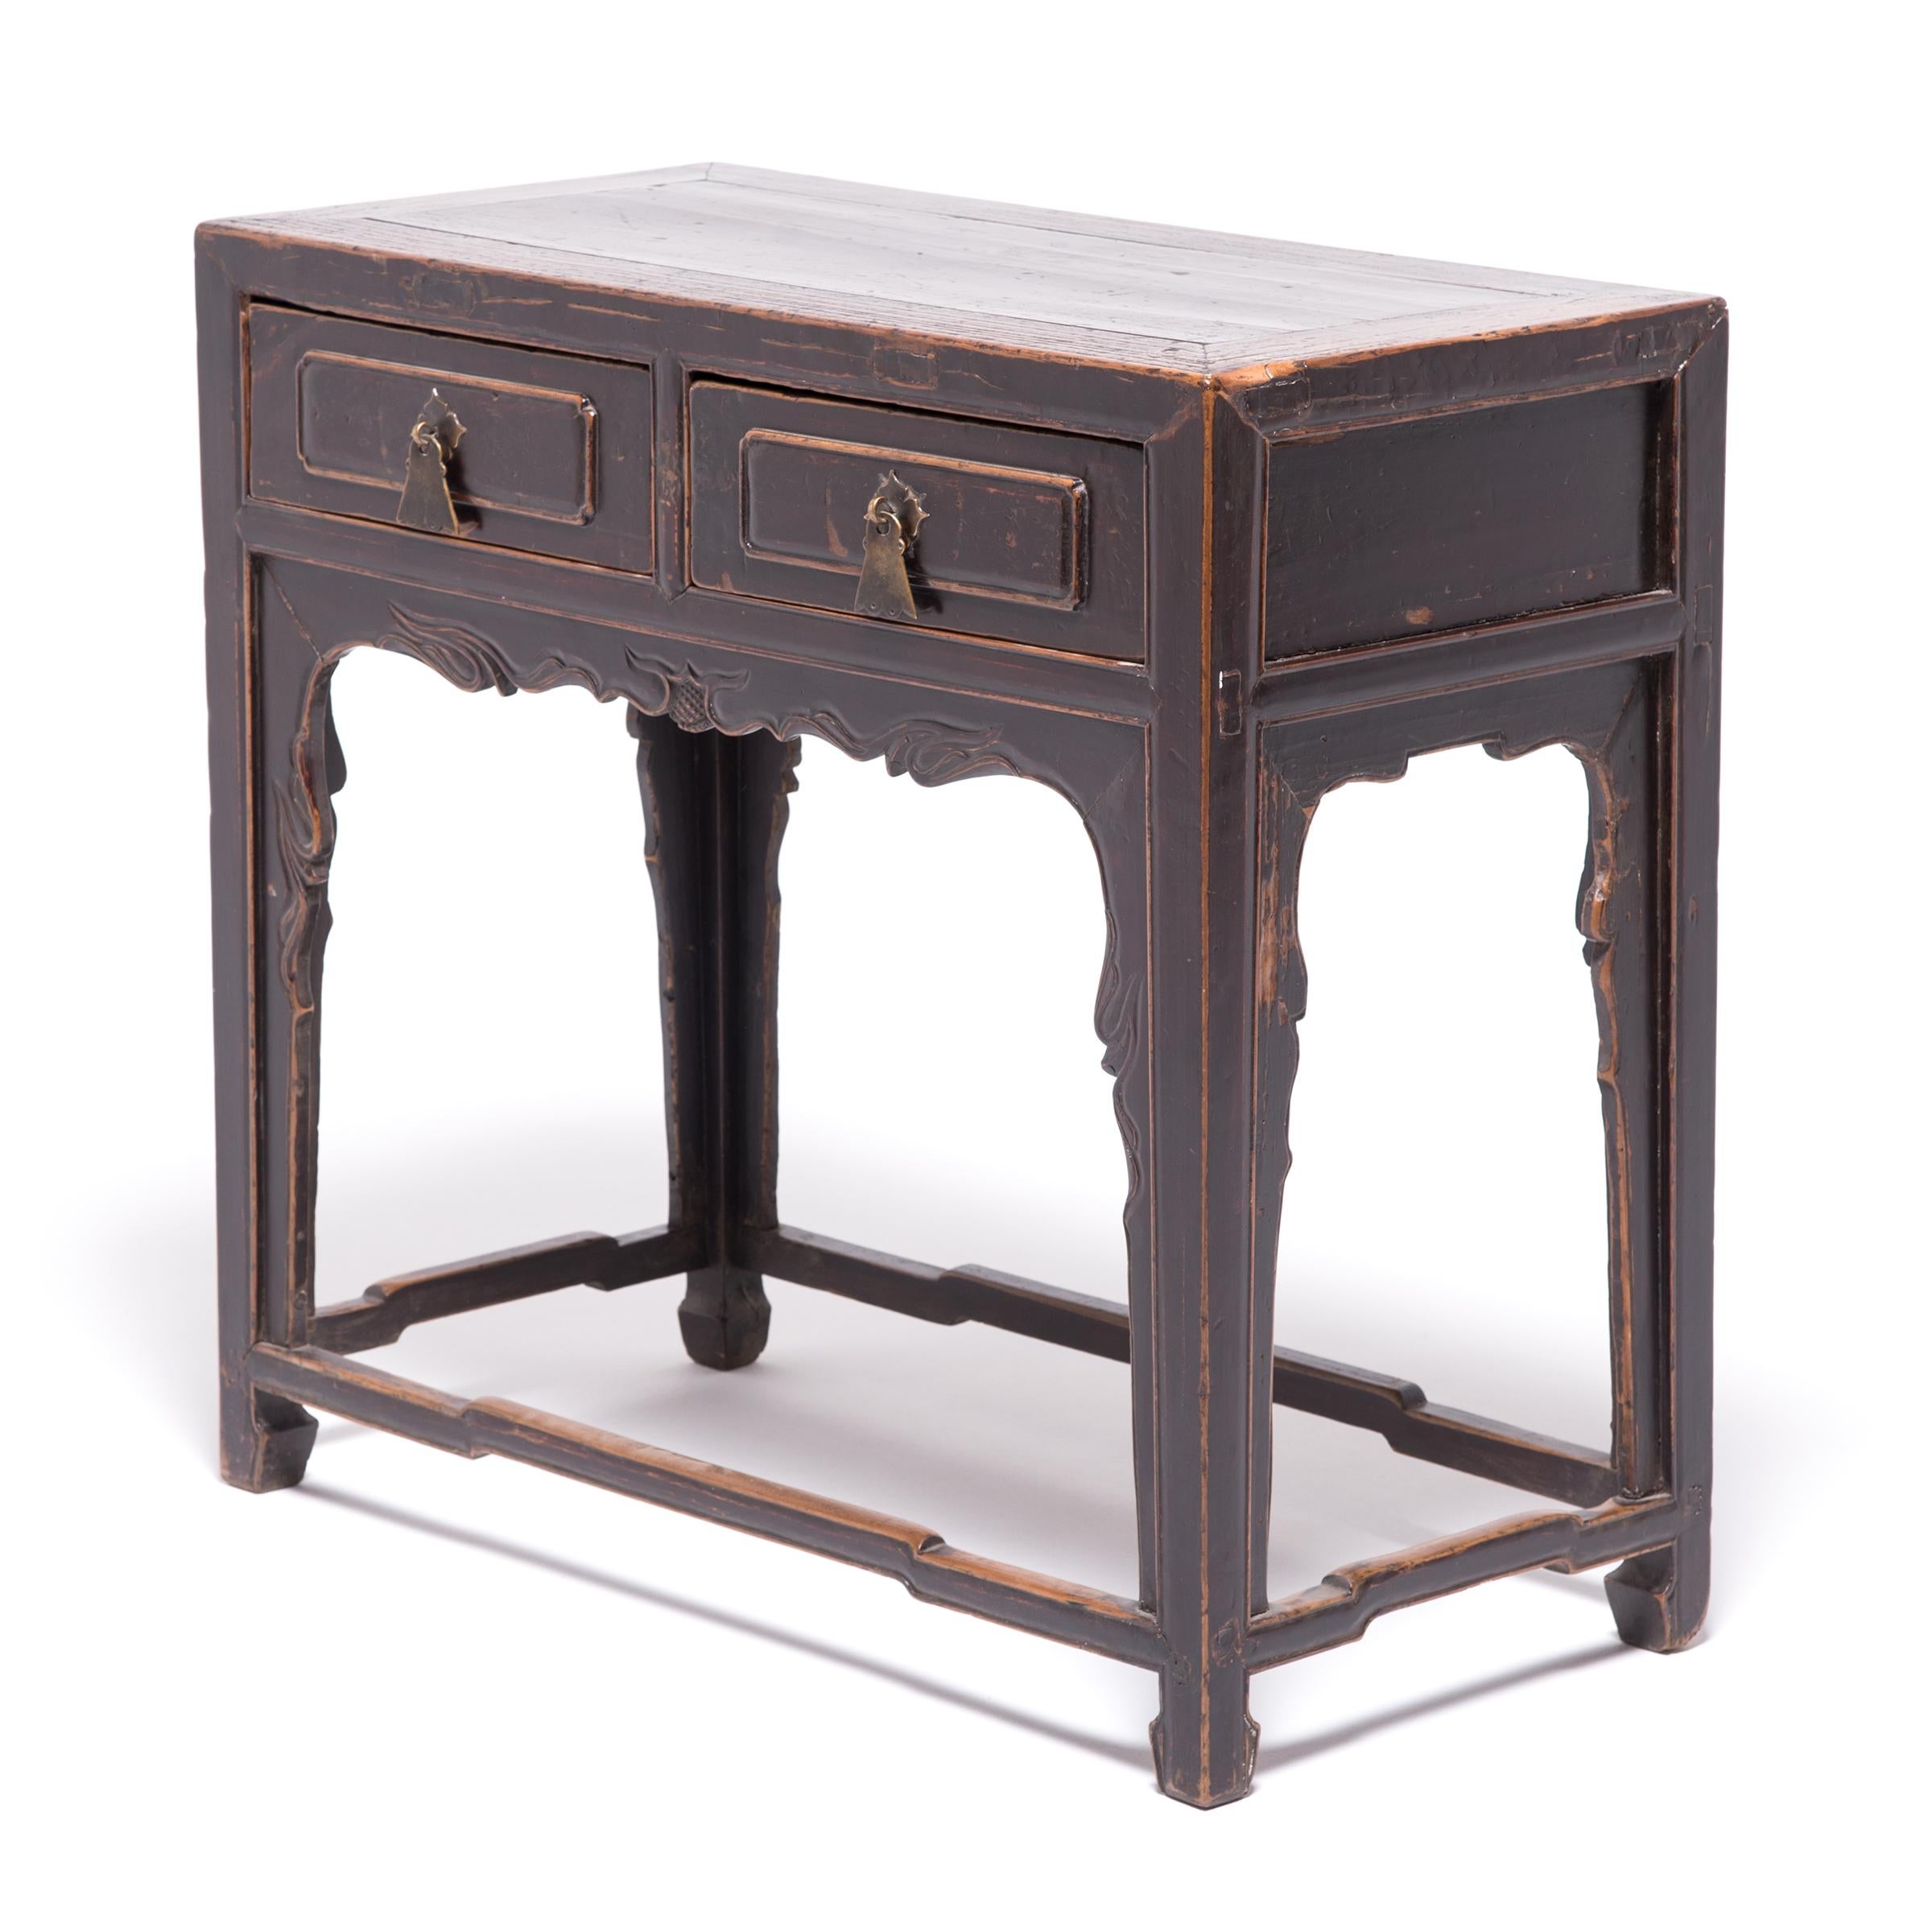 The worn edges and rich patina of this two-drawer table serve to outline this 19th century provincial table’s elegant lines. Made of northern Chinese elm (yumu) favored by woodworkers for its durability as well as beauty, the table has an elegantly